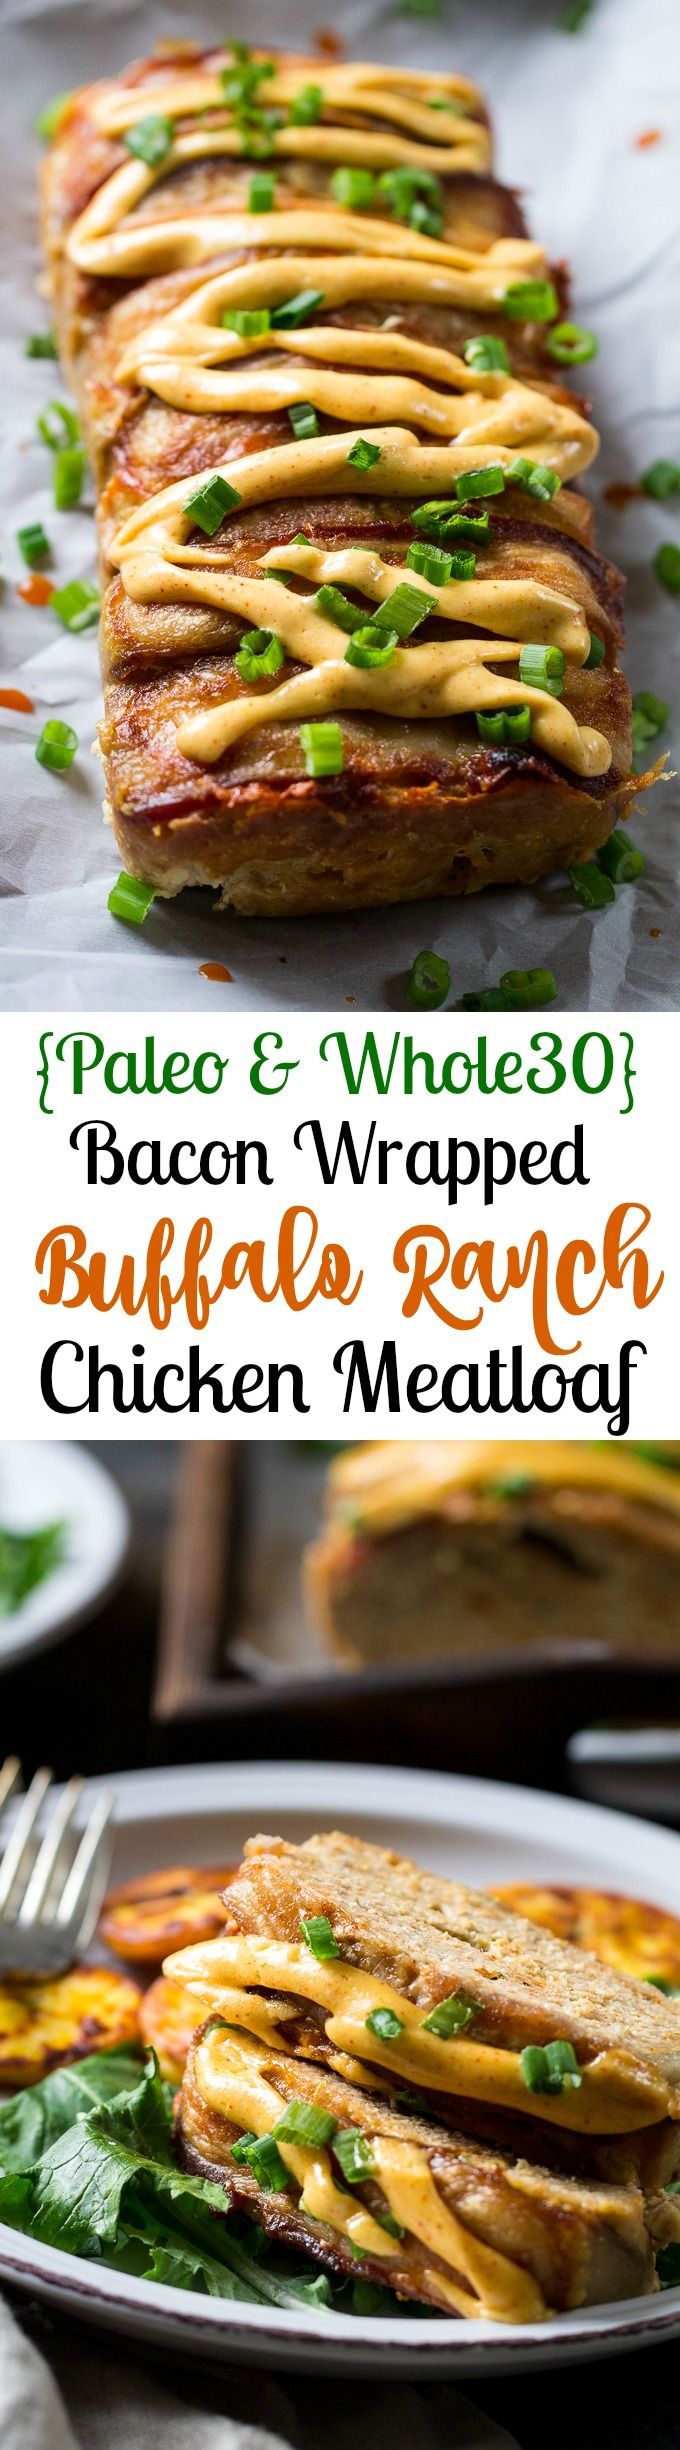 Bacon Wrapped Buffalo Ranch Chicken Meatloaf {Paleo & Whole30} this meatloaf is packed with flavor, wrapped in bacon and topped